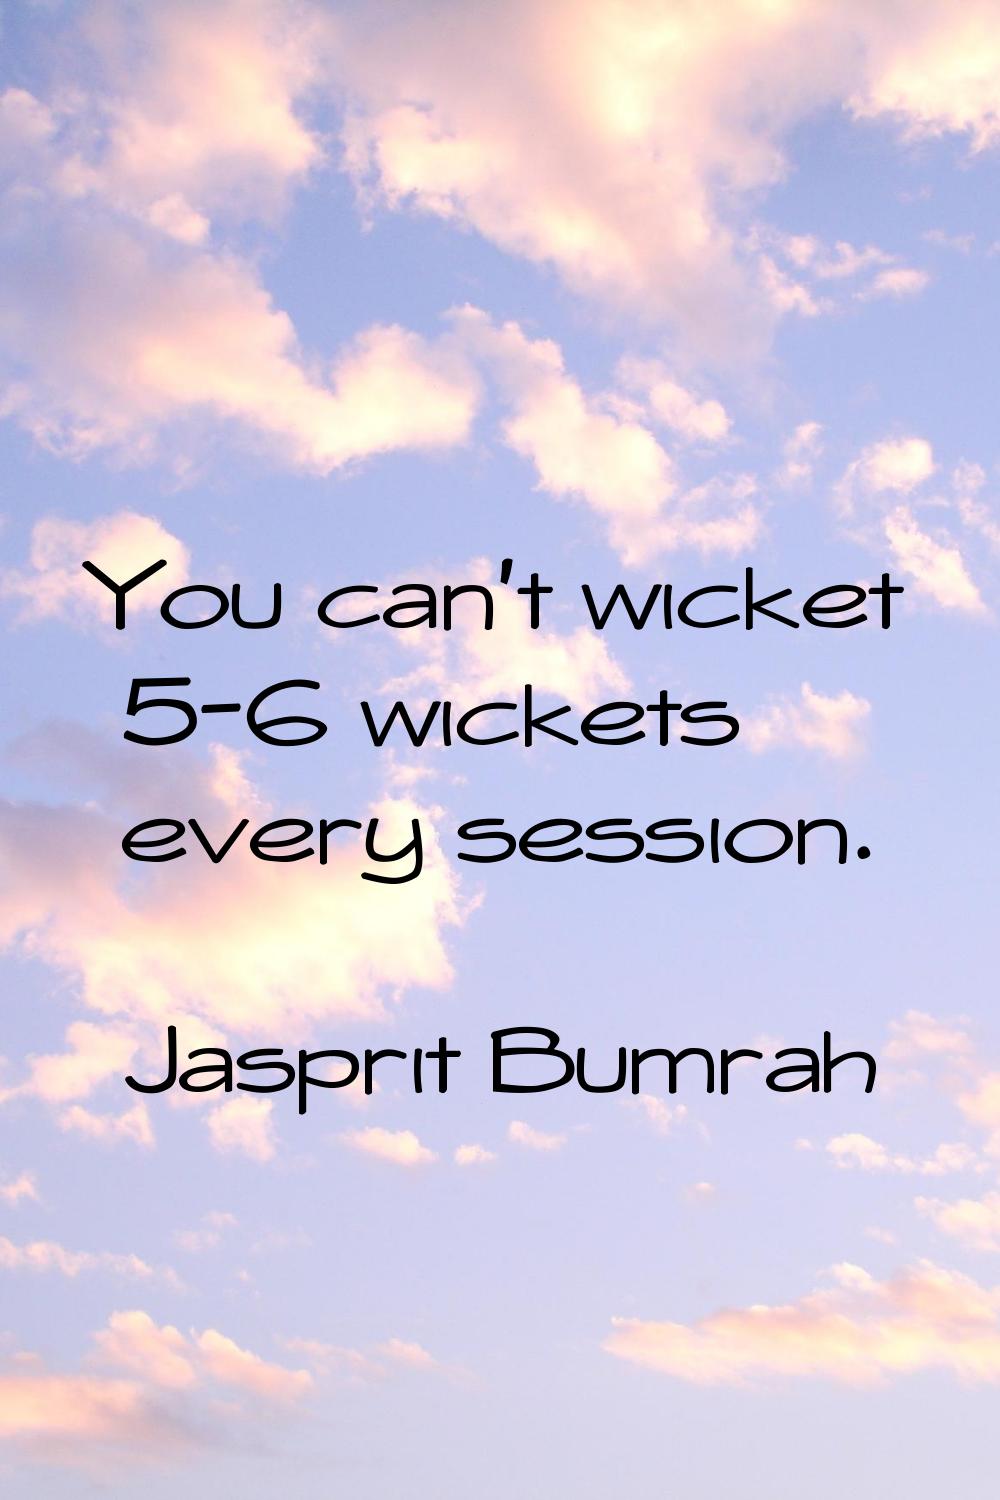 You can't wicket 5-6 wickets every session.